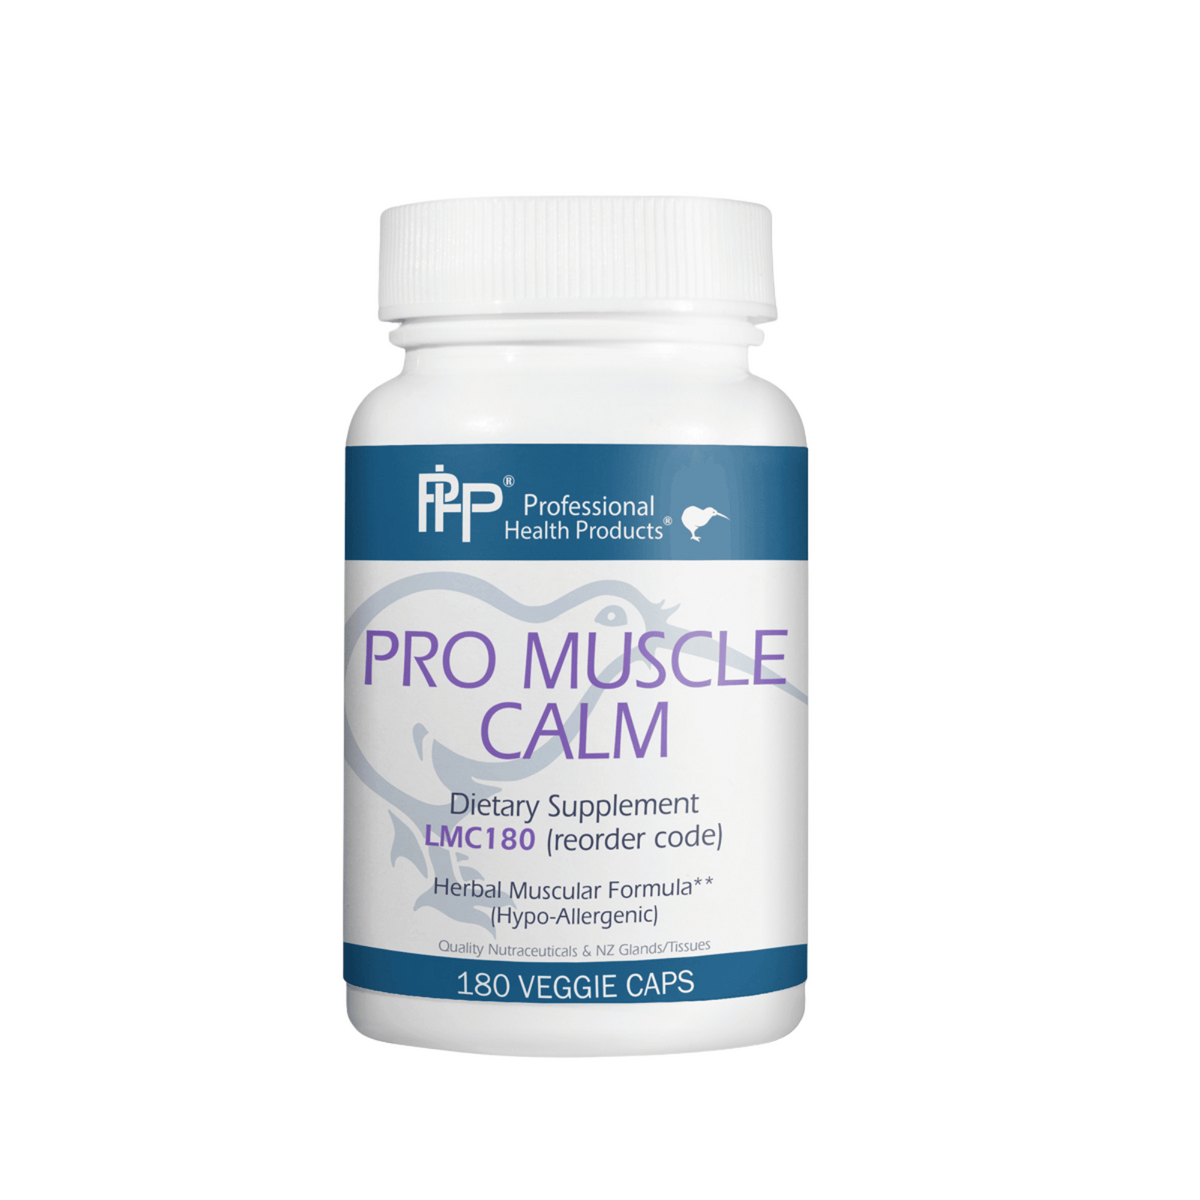 Primary Image of Pro Muscle Calm